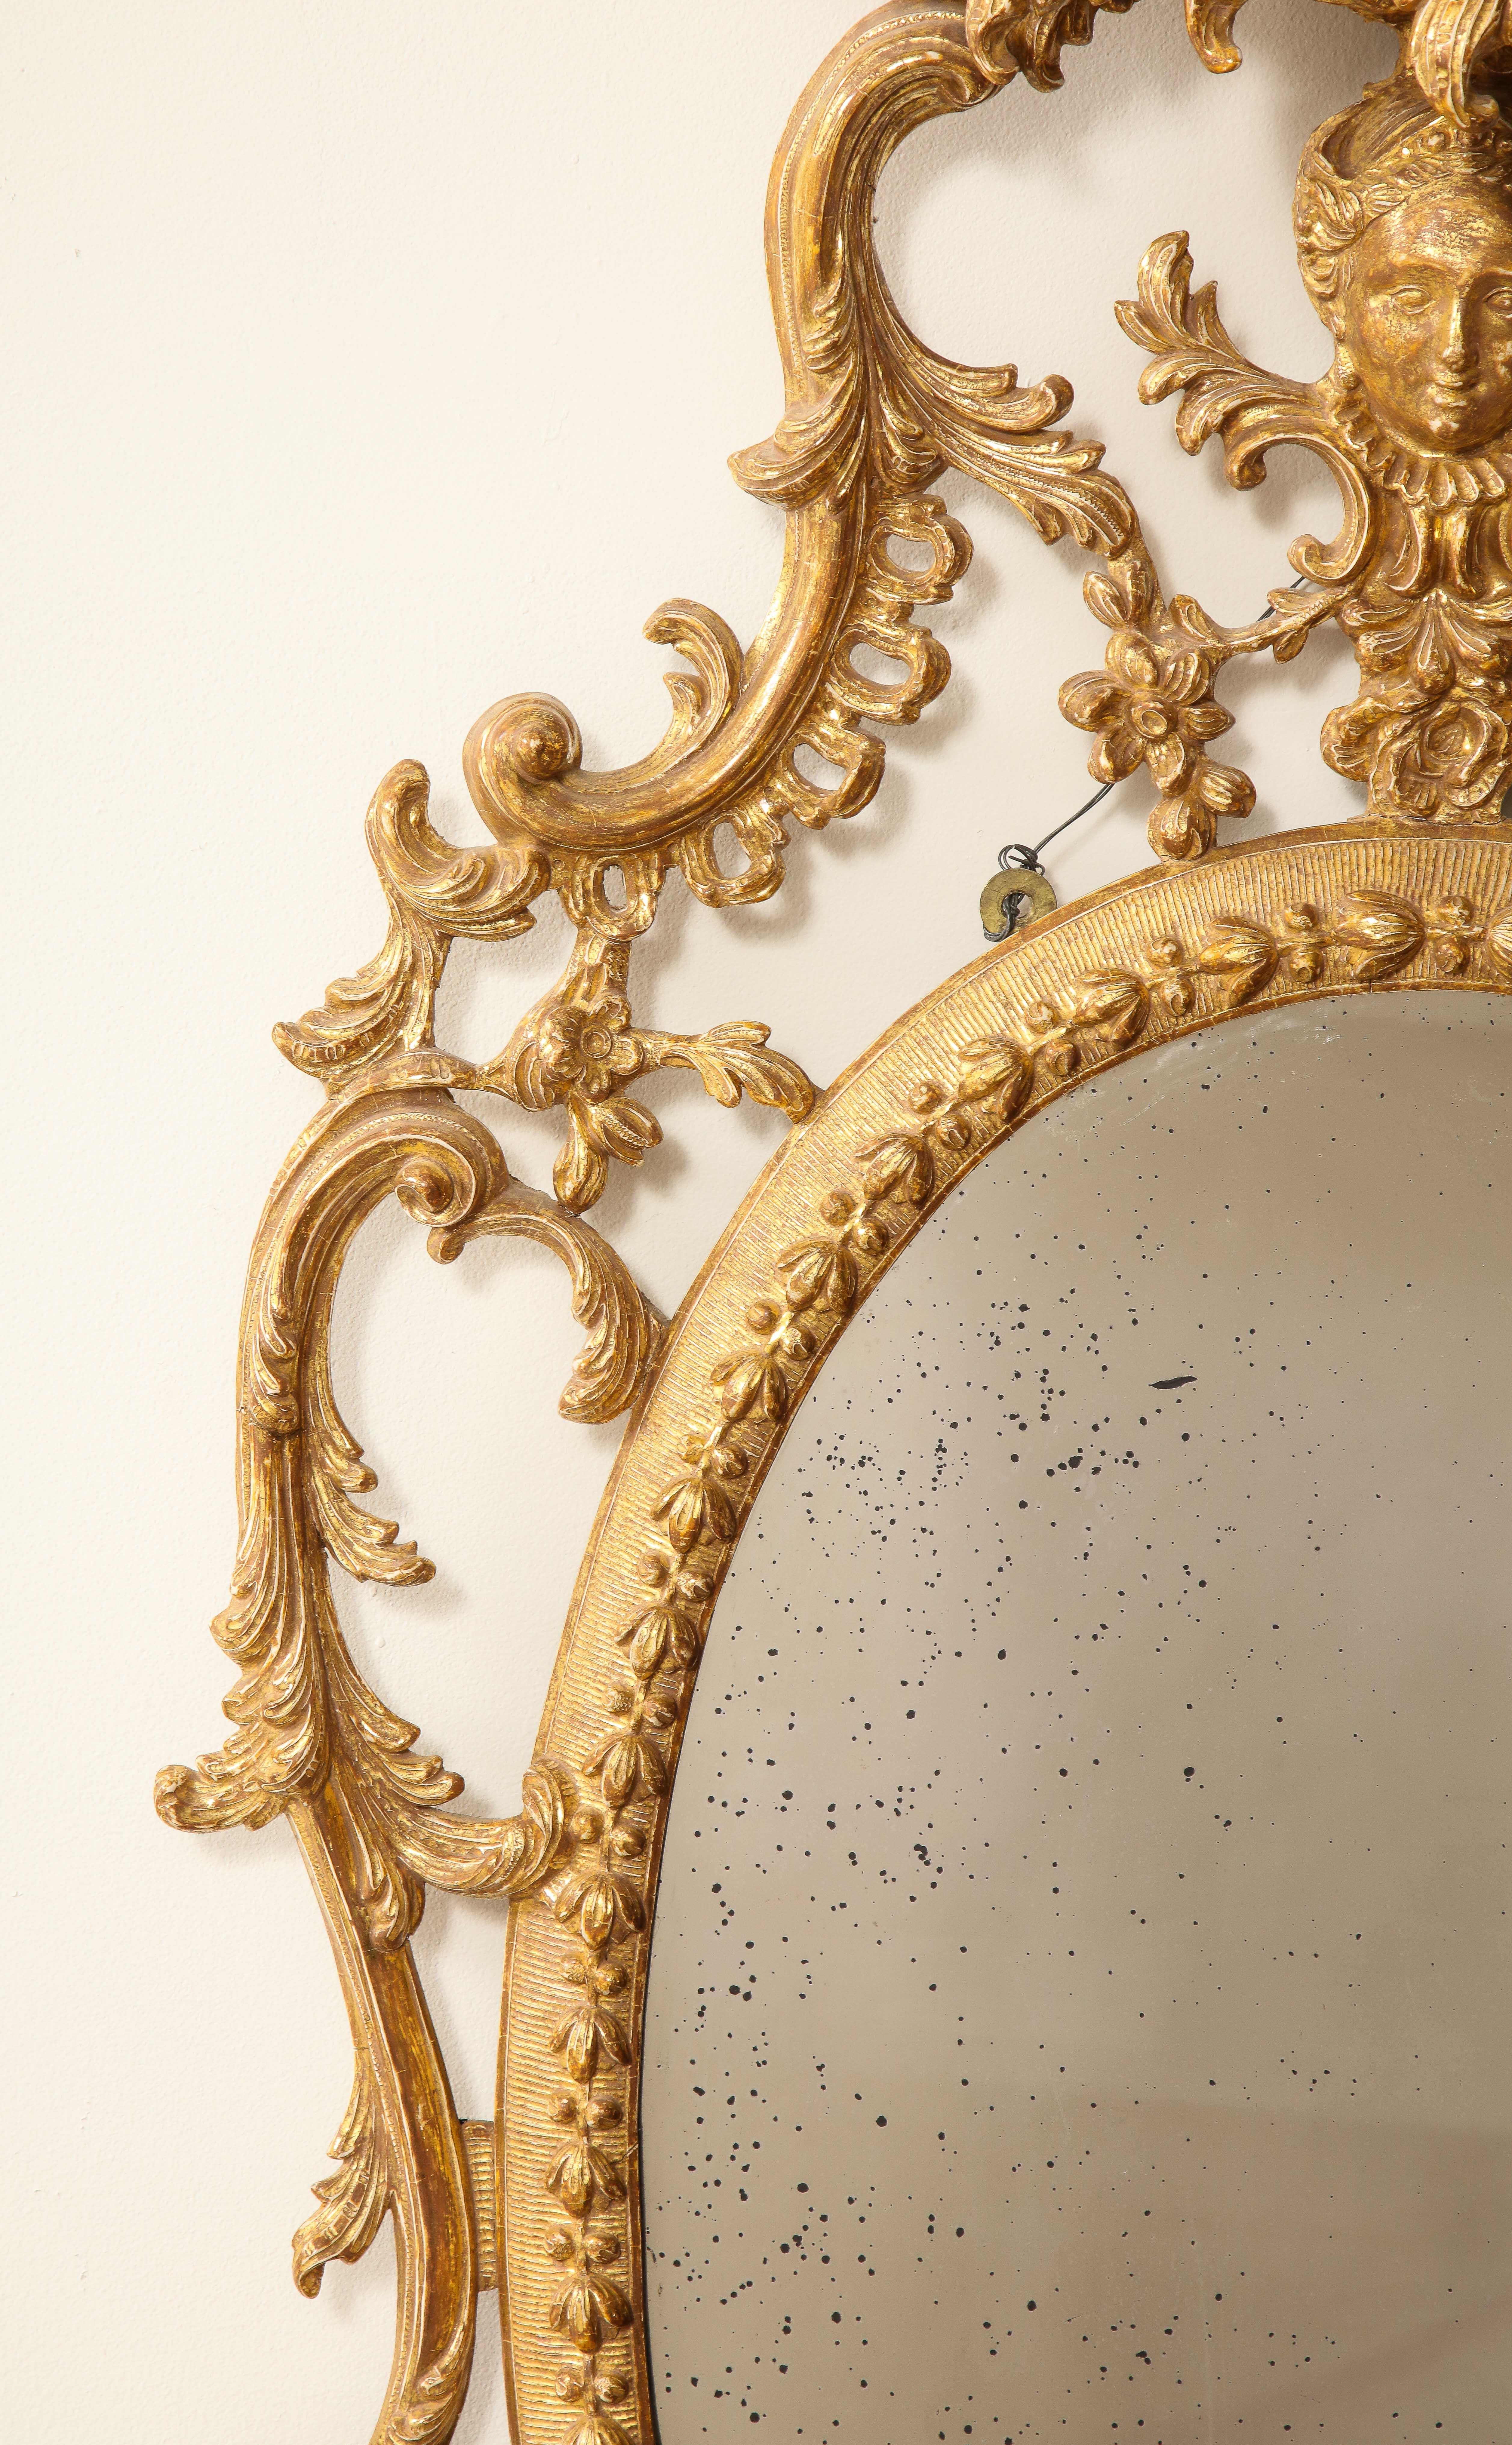 Anodized Pr. George III Gilt Carton-Pierre and Giltwood Oval Mirrors, Manner John Linnell For Sale